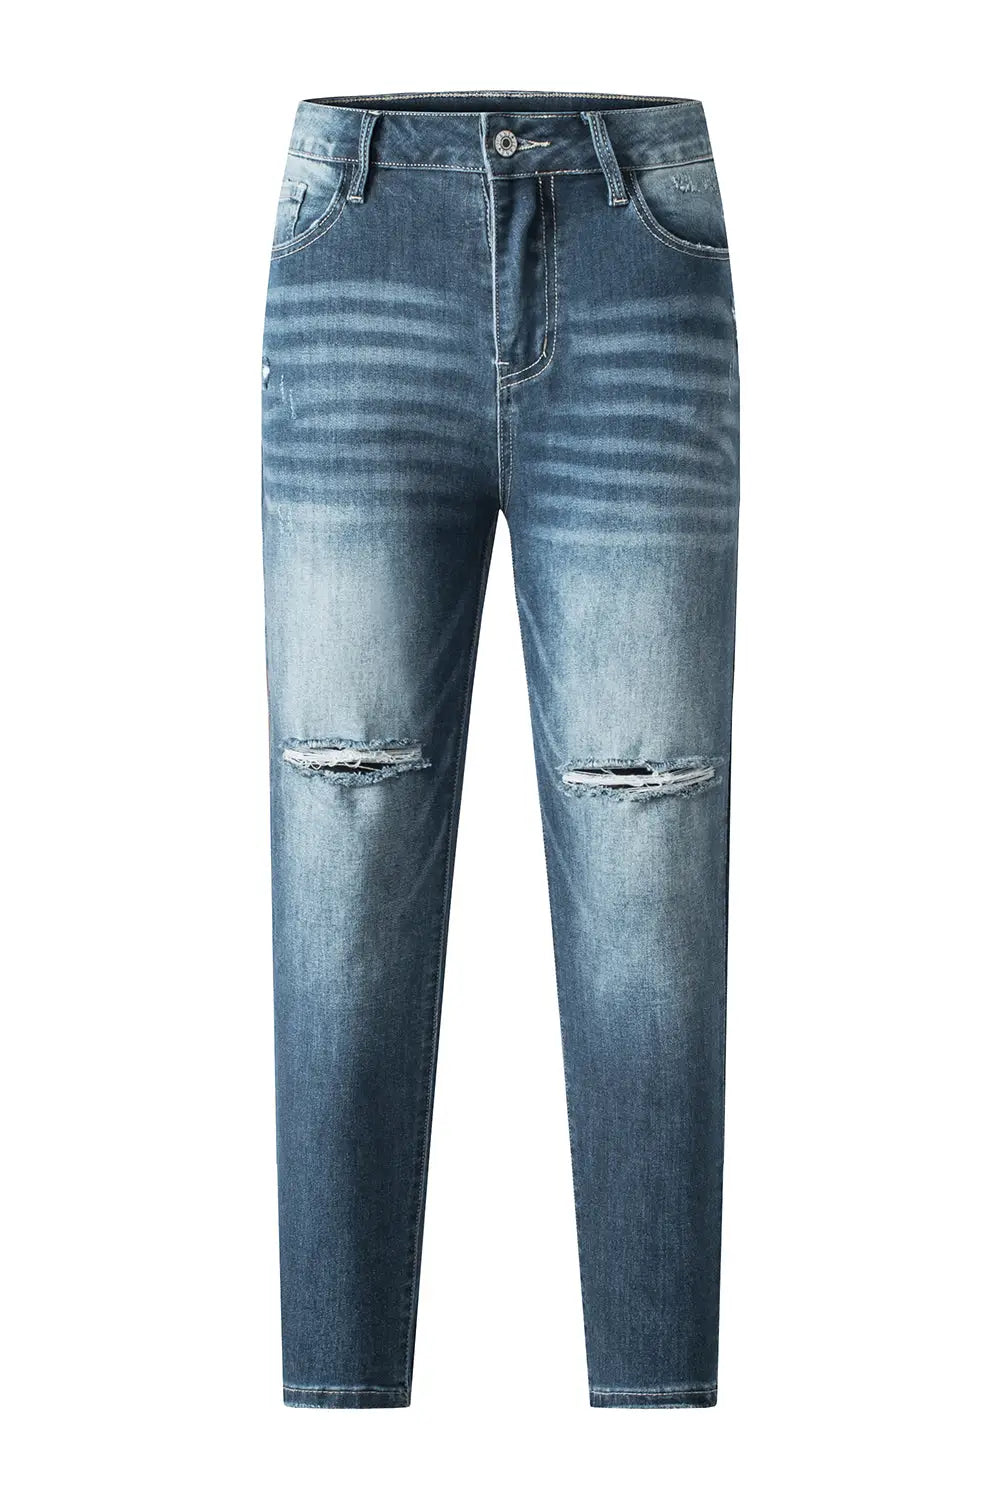 Blue distressed ripped skinny jeans - bottoms